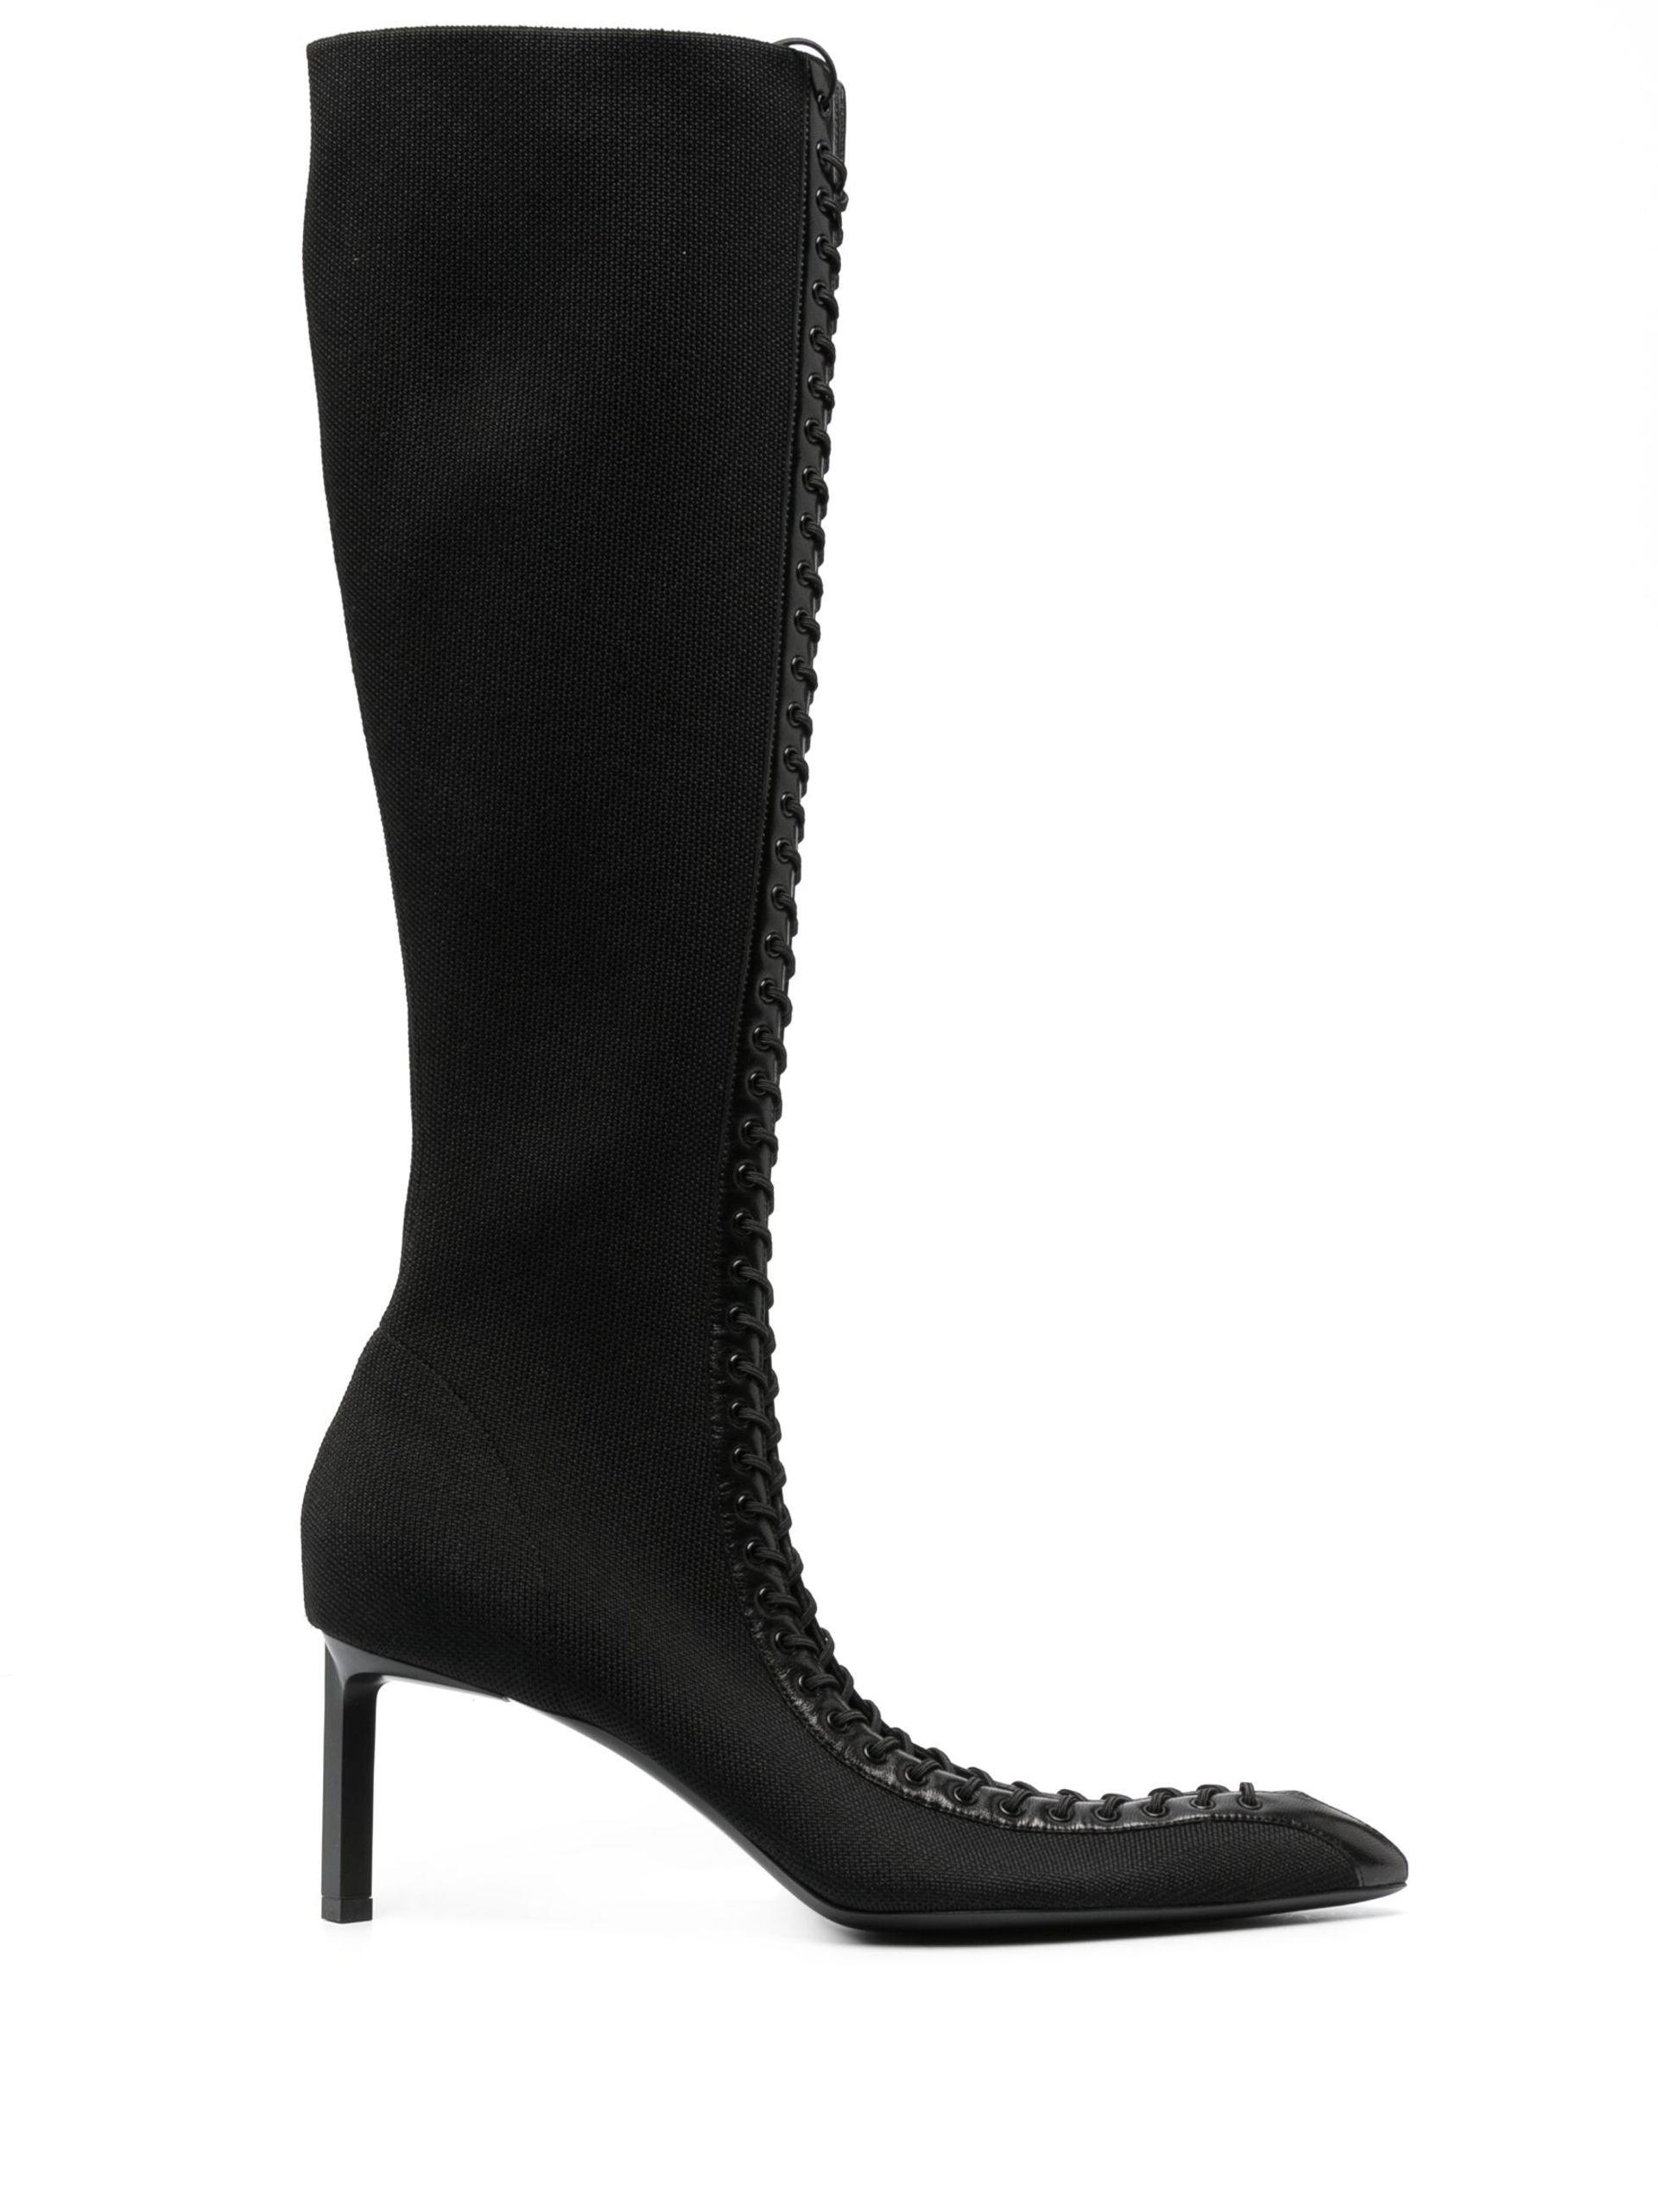 Givenchy Show 70 Leather Lace Detail Knee-high Boots in Black | Lyst